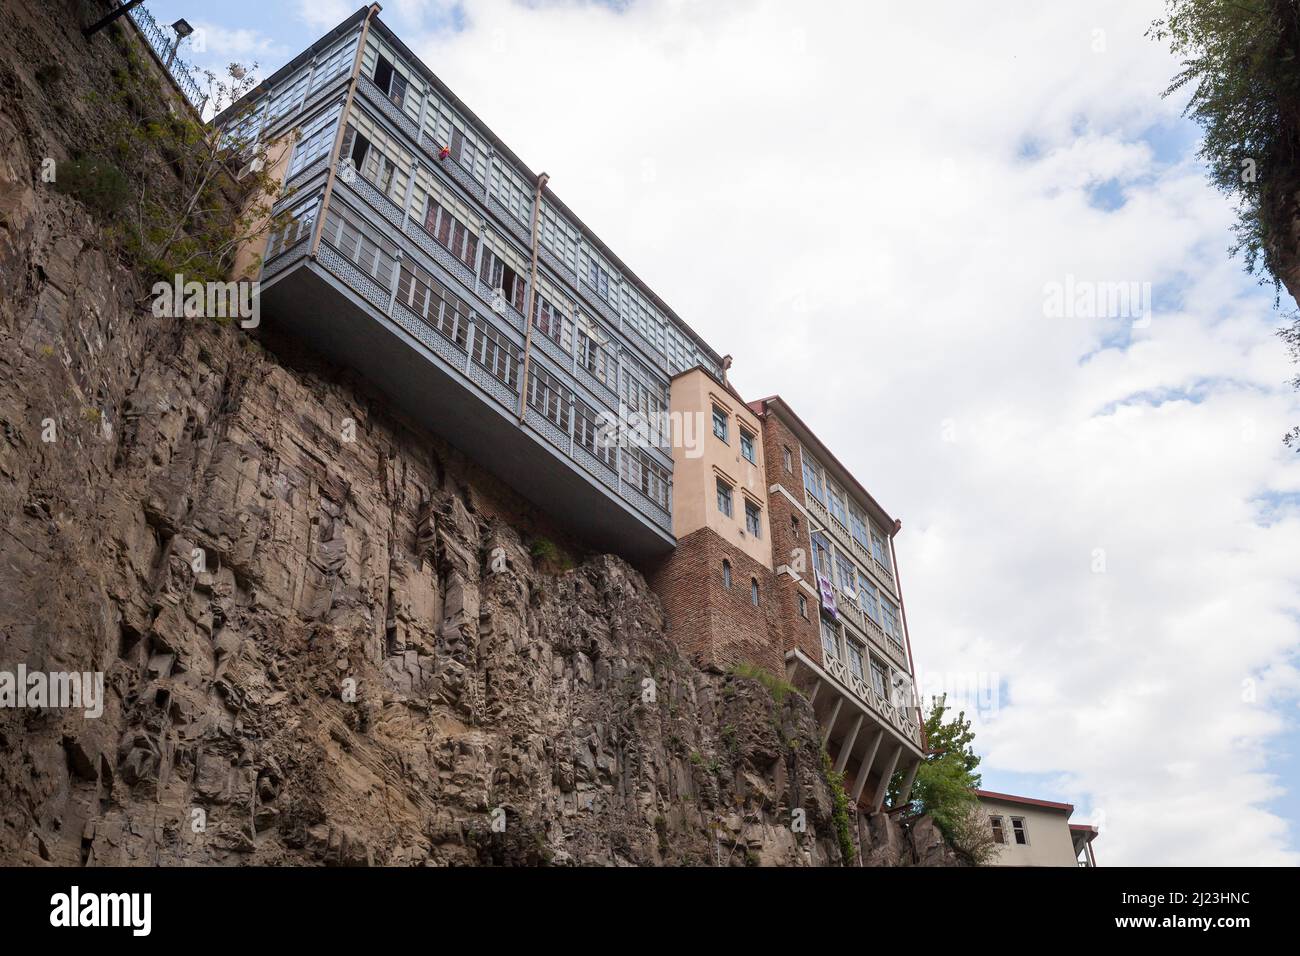 Old Tbilisi town, the Leghvtakhevi Canyon view with old wooden houses on rocks. Georgia Stock Photo